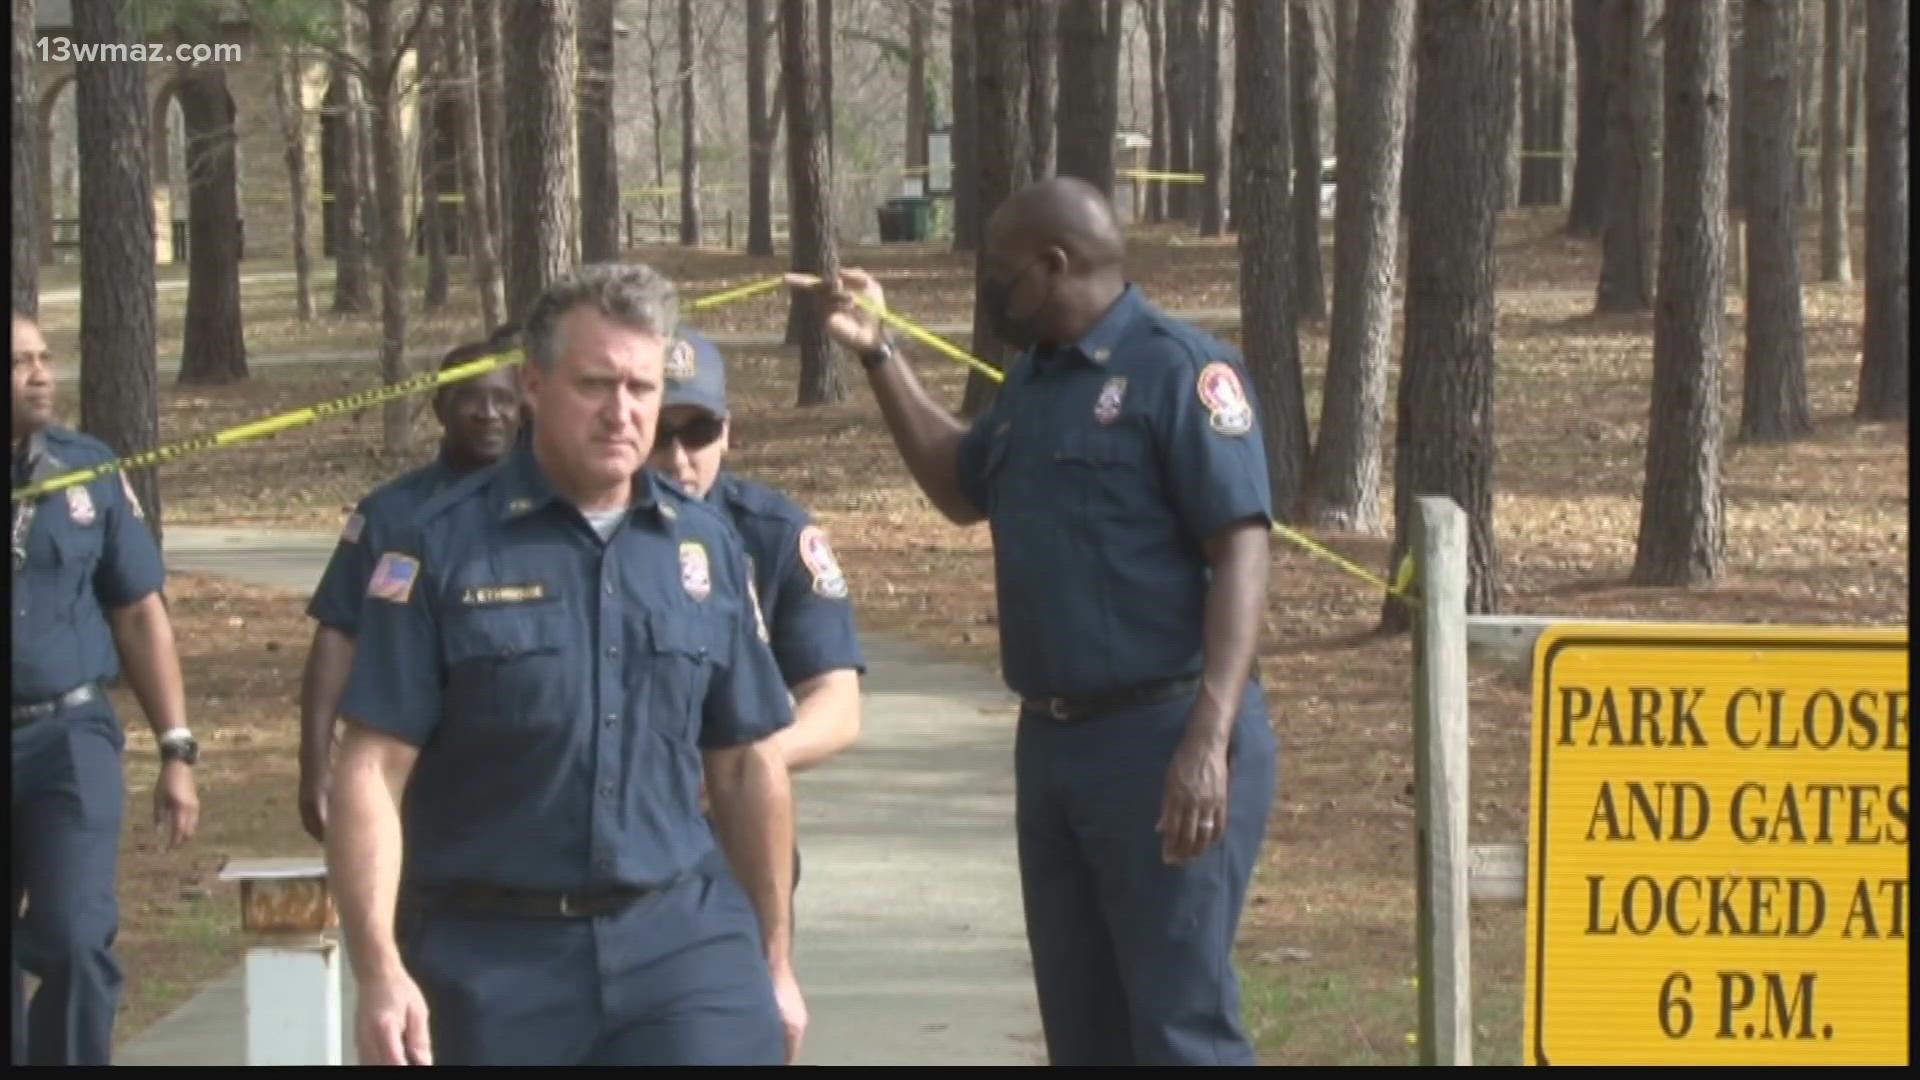 The search continues for a man who's been missing since jumping into the Ocmulgee River.